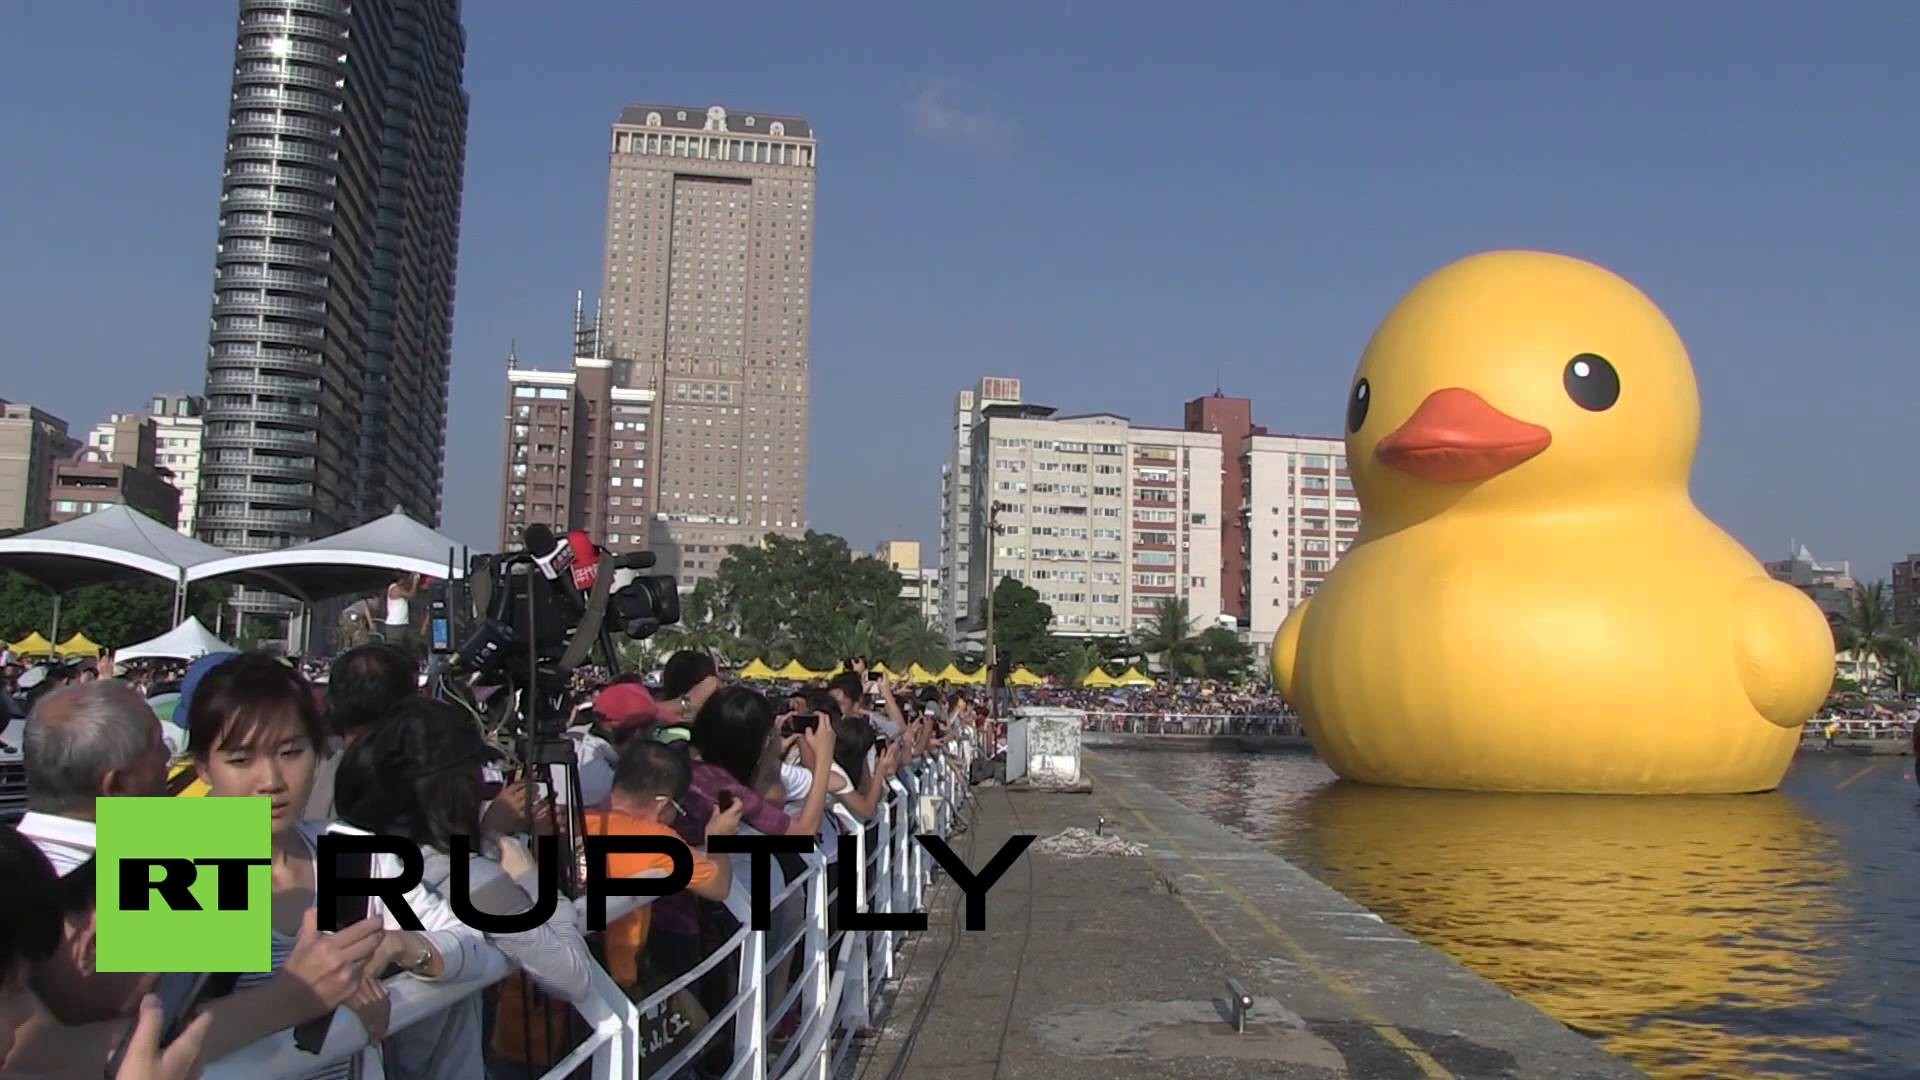 1920x1080 Taiwan: Giant rubber duck makes waves in Kaohsiung